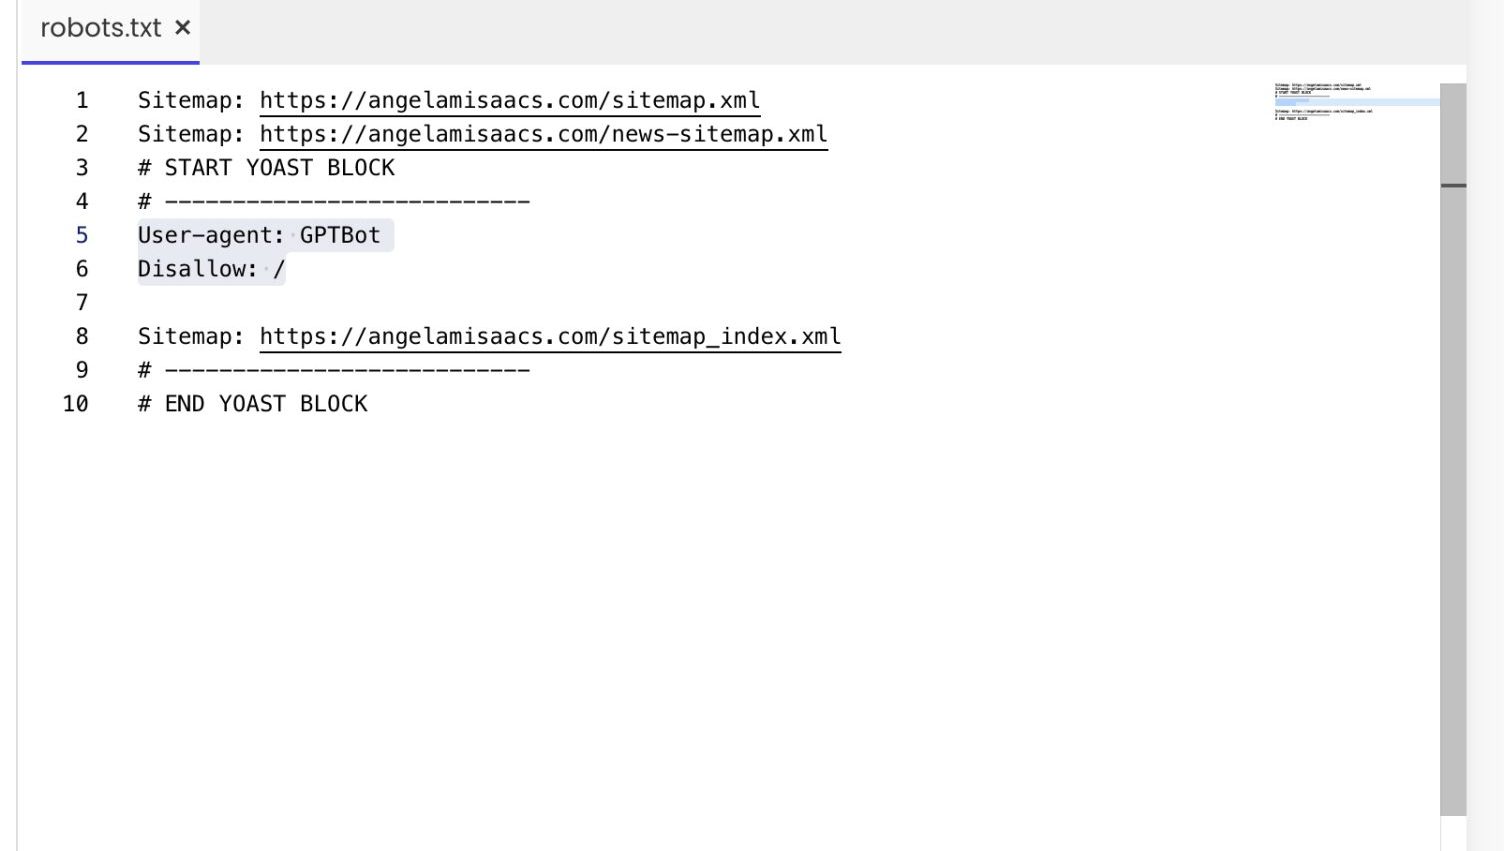 Screenshot of robots.txt file which is used to block ChatPGT on websites